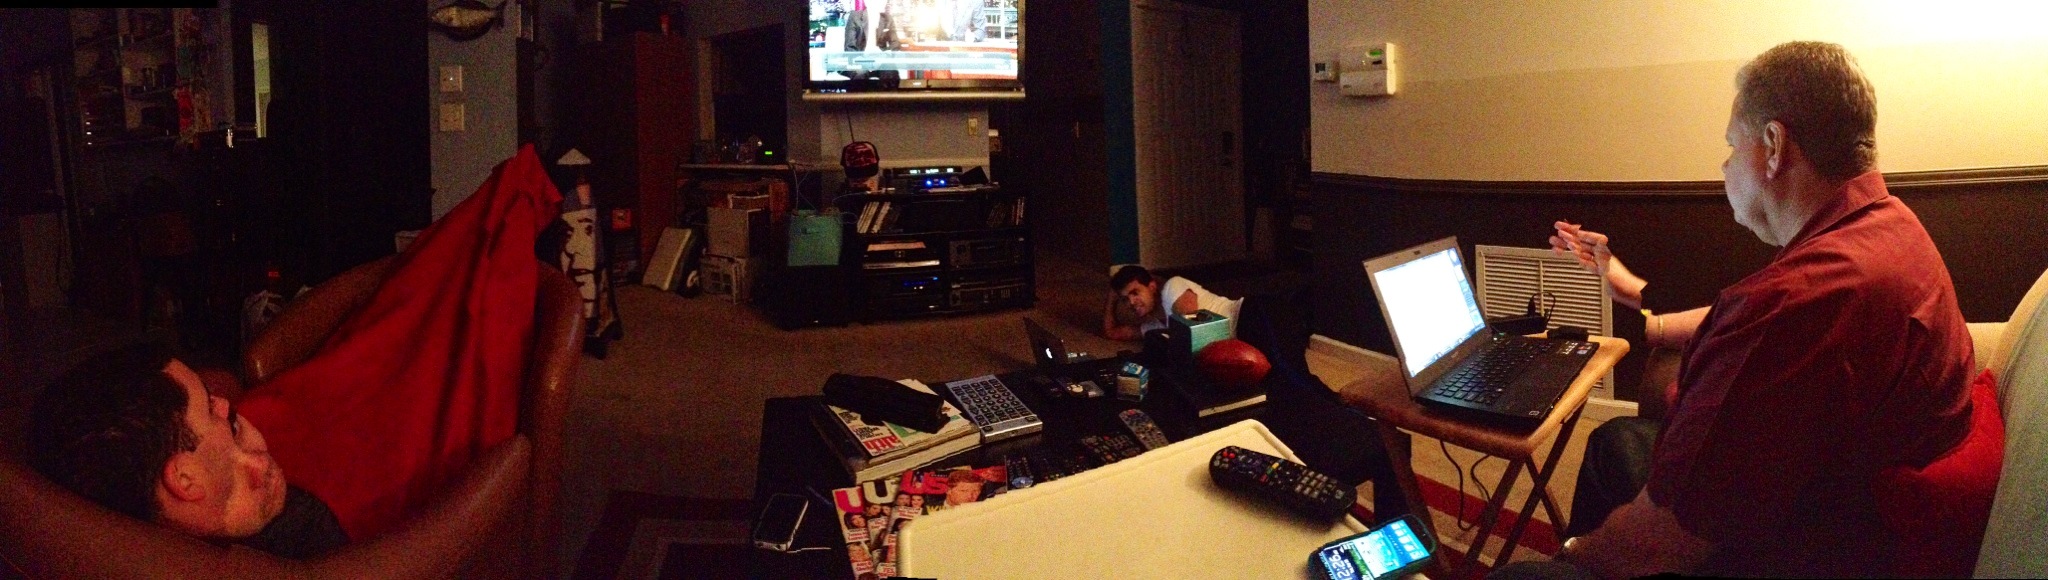 iOS 6 Panorama feature slicing dave's hand